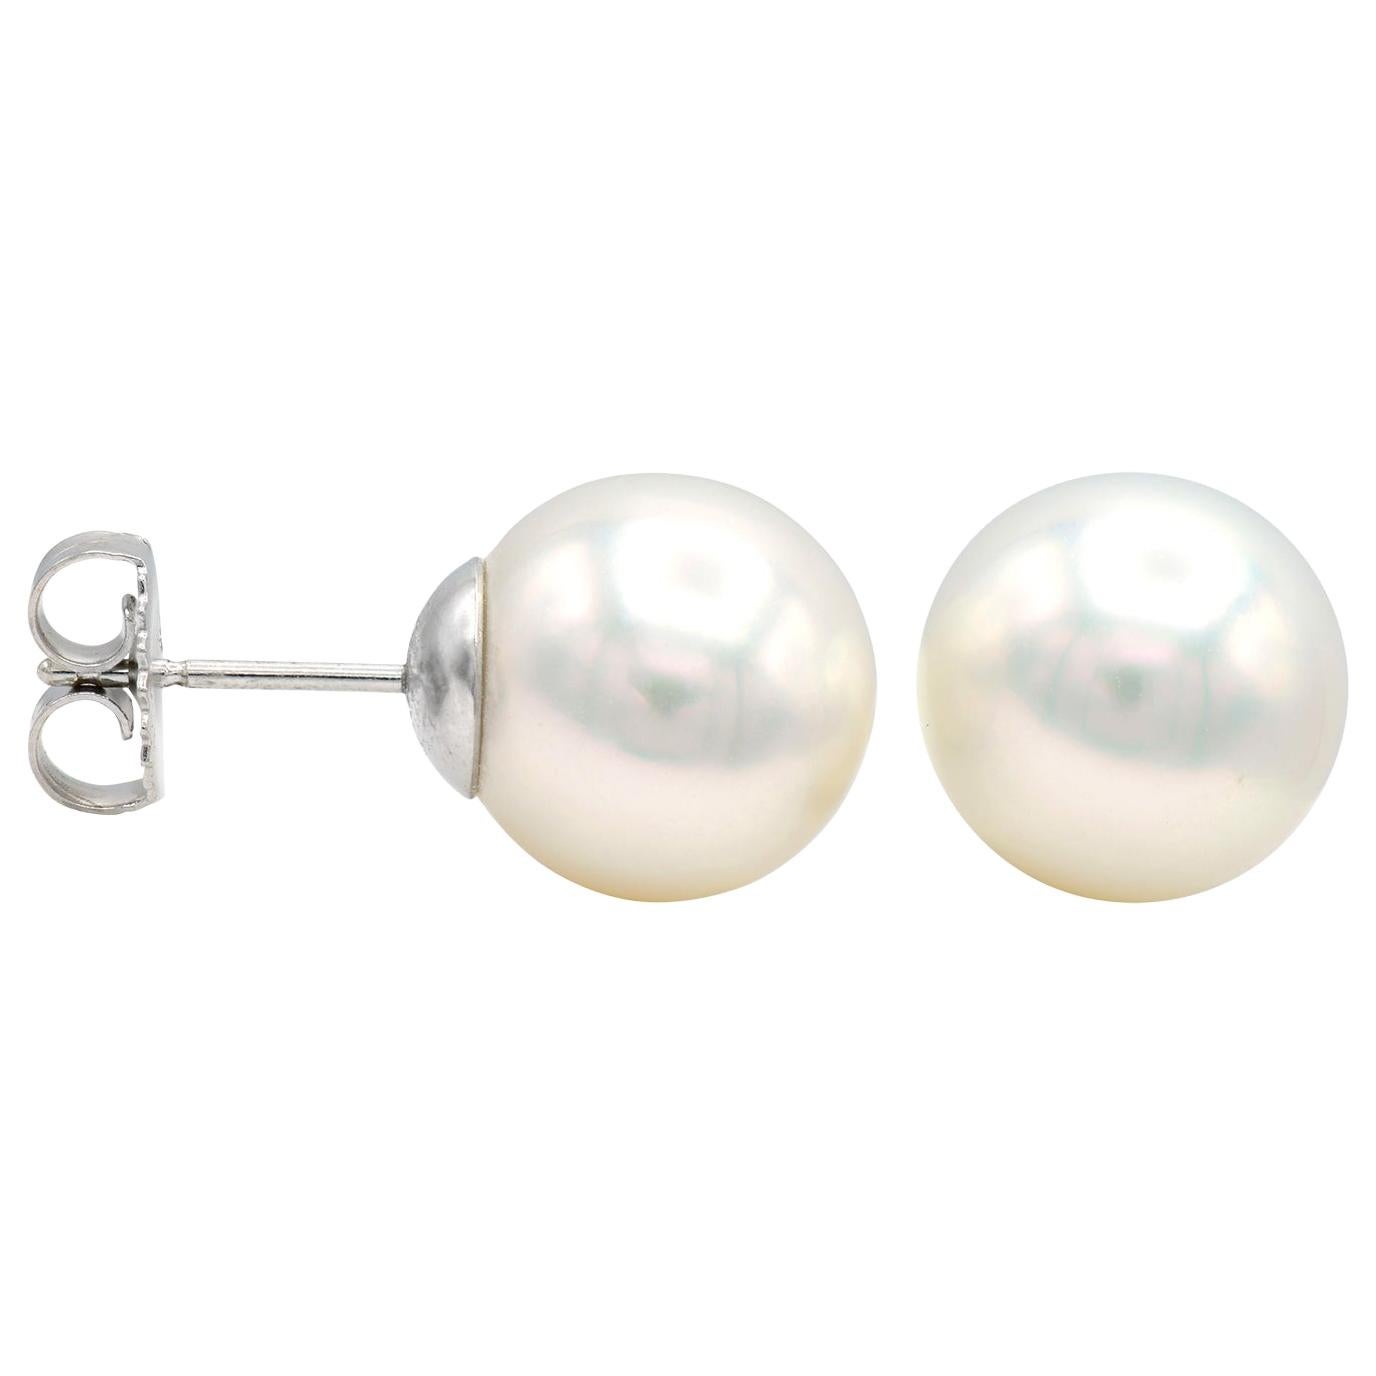 Freshwater Pearl Stud Earrings with 14 Karat White Gold Post and Backs For Sale